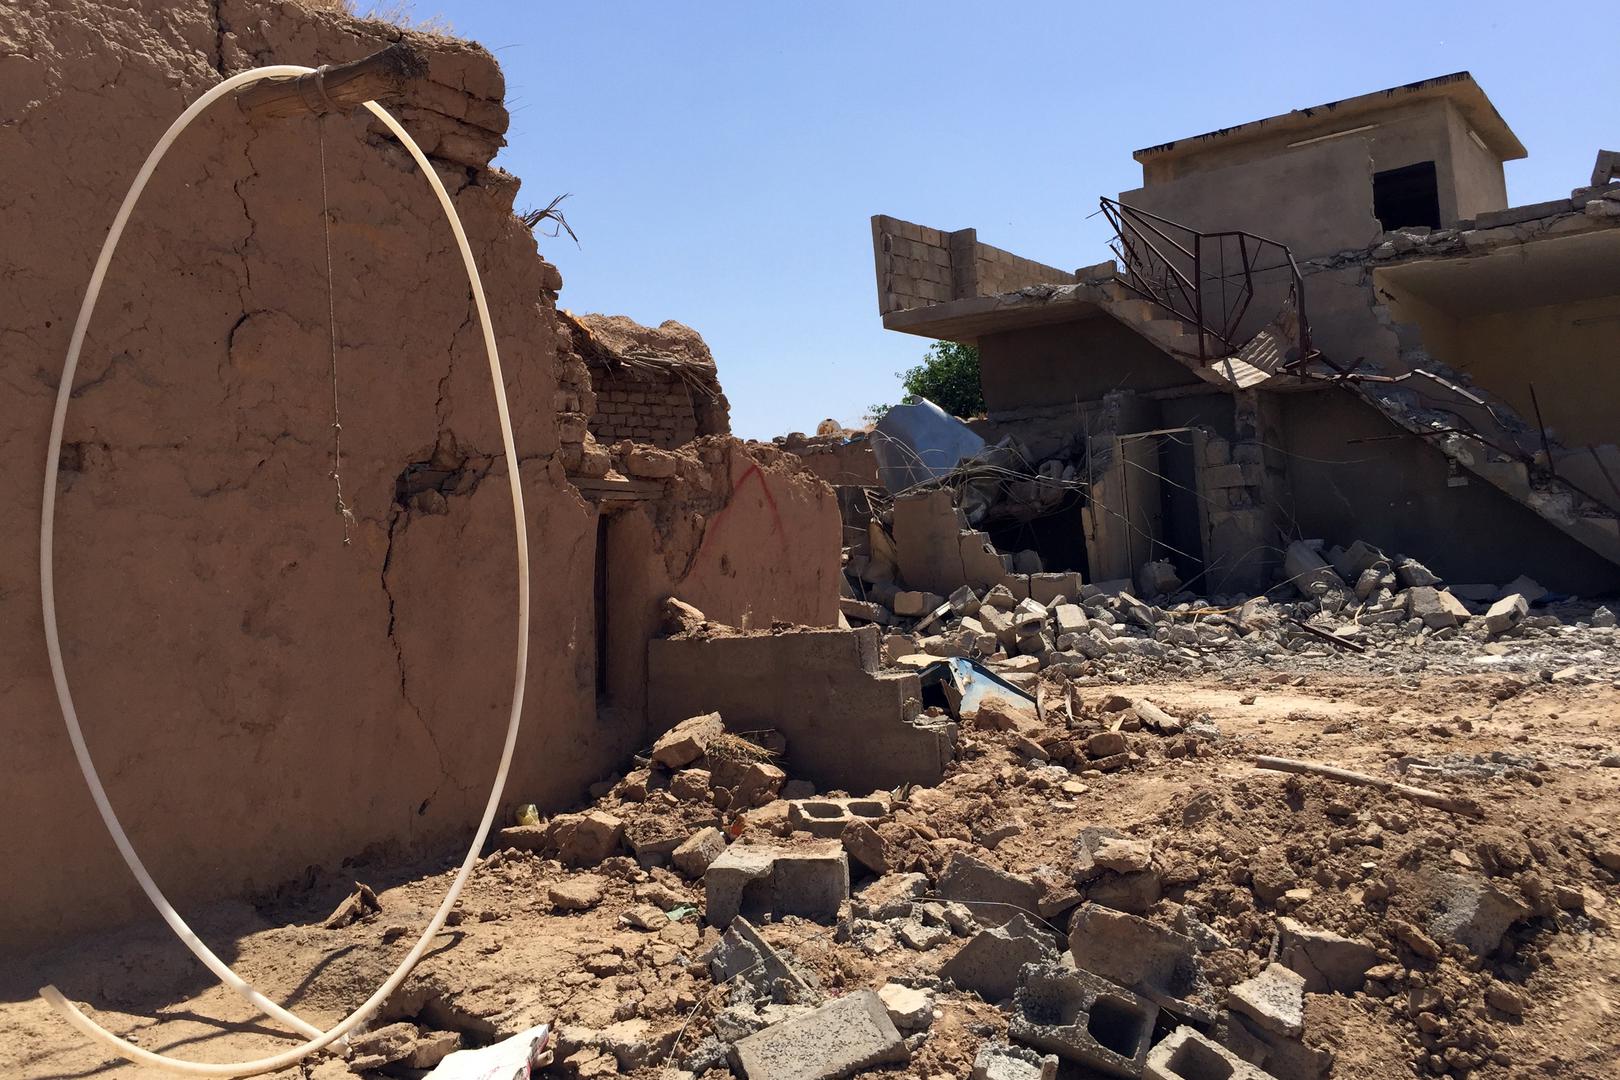 Destroyed houses in Qarah Tappah, with partial red “X” still visible, May 20, 2016. © 2016 Human Rights Watch